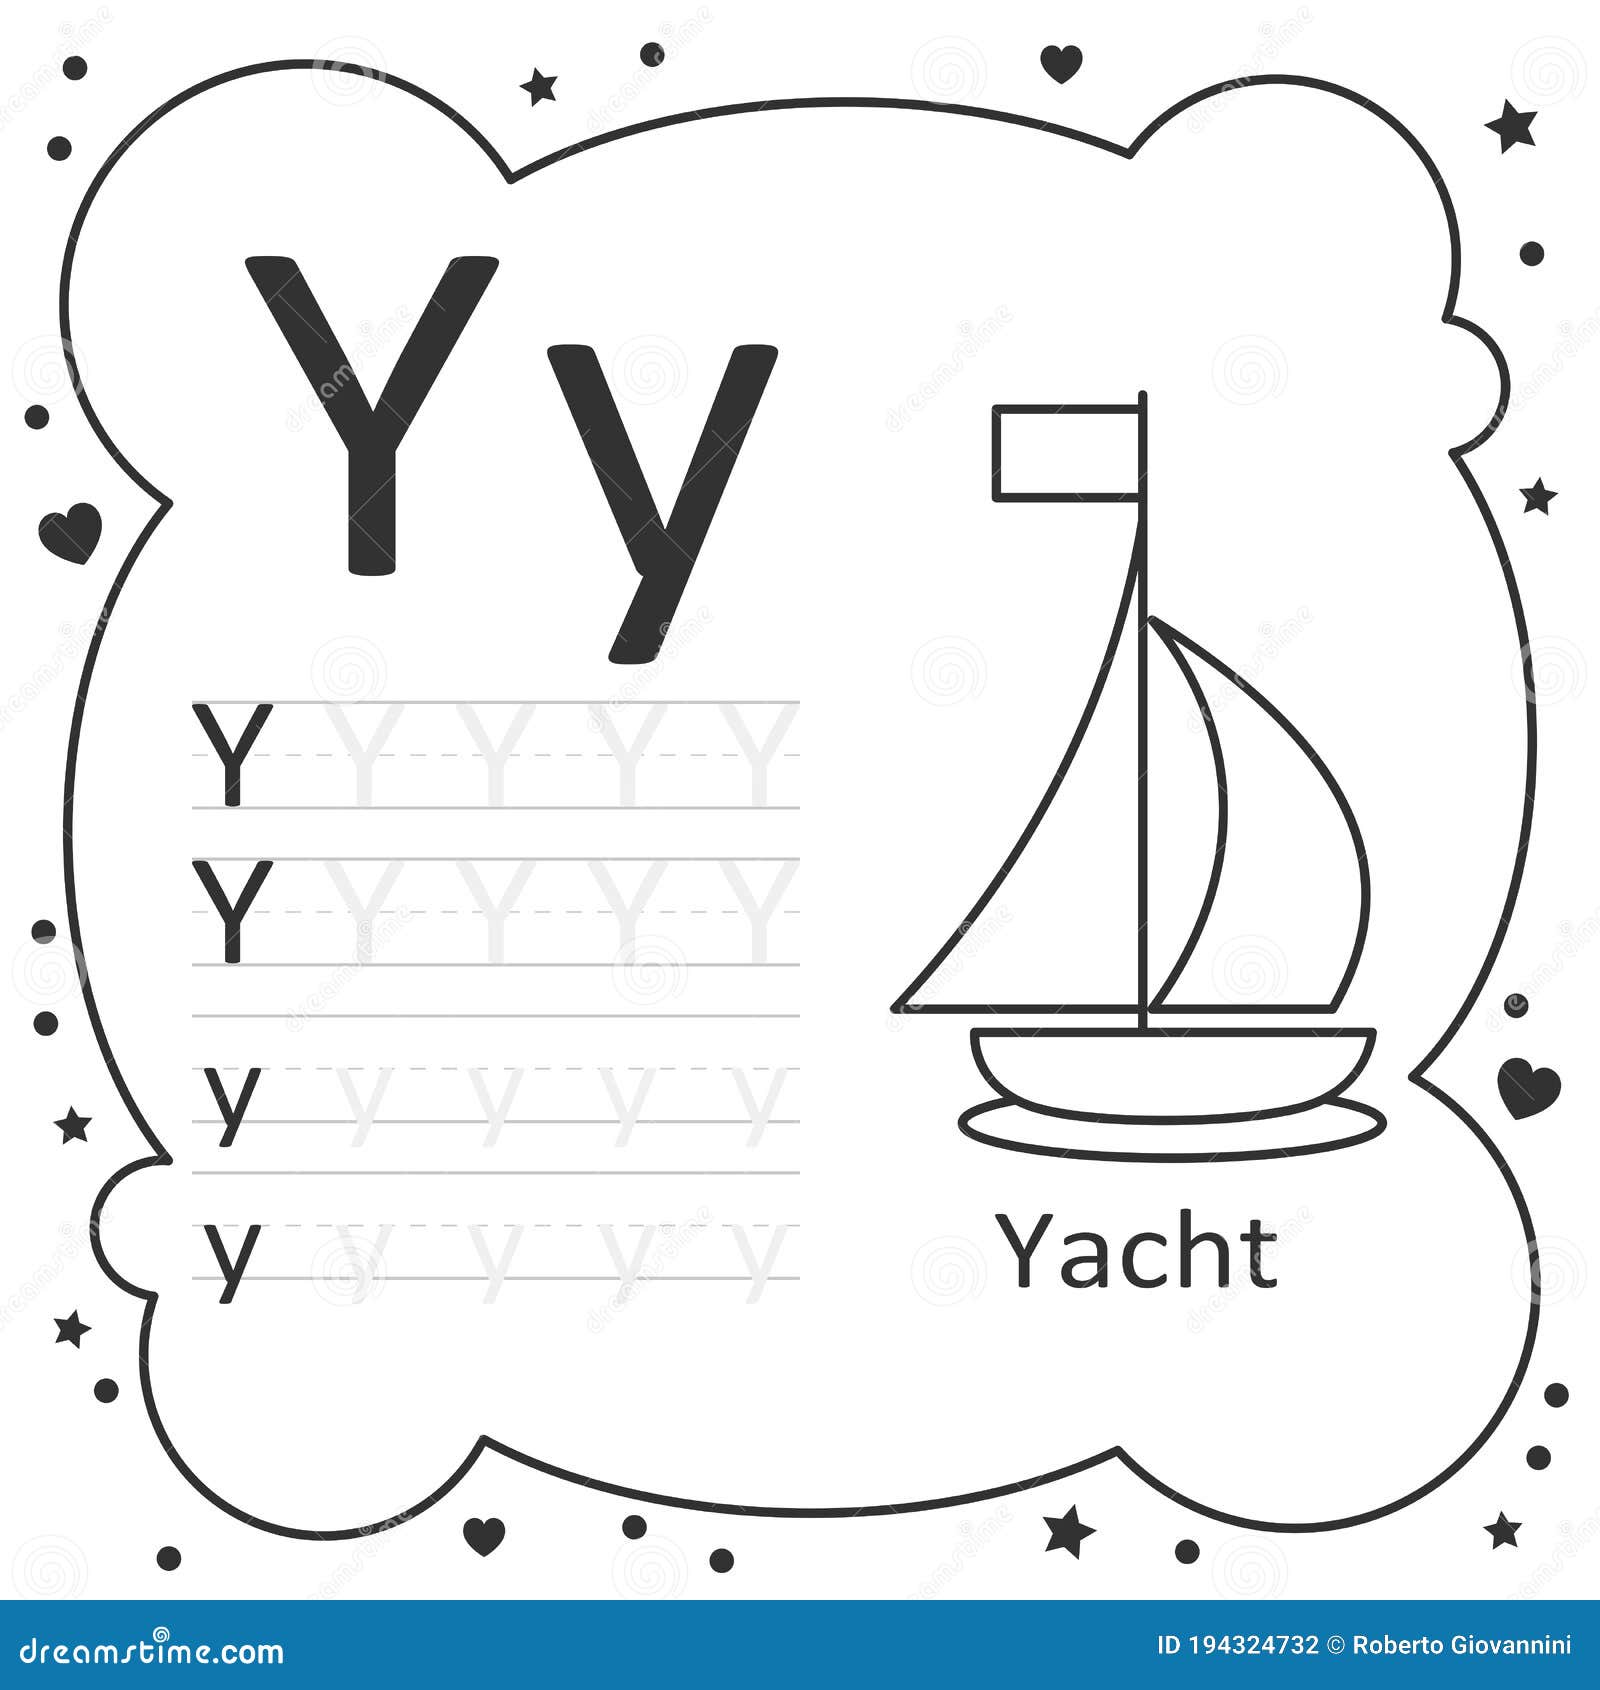 yachts sheet 4 letters